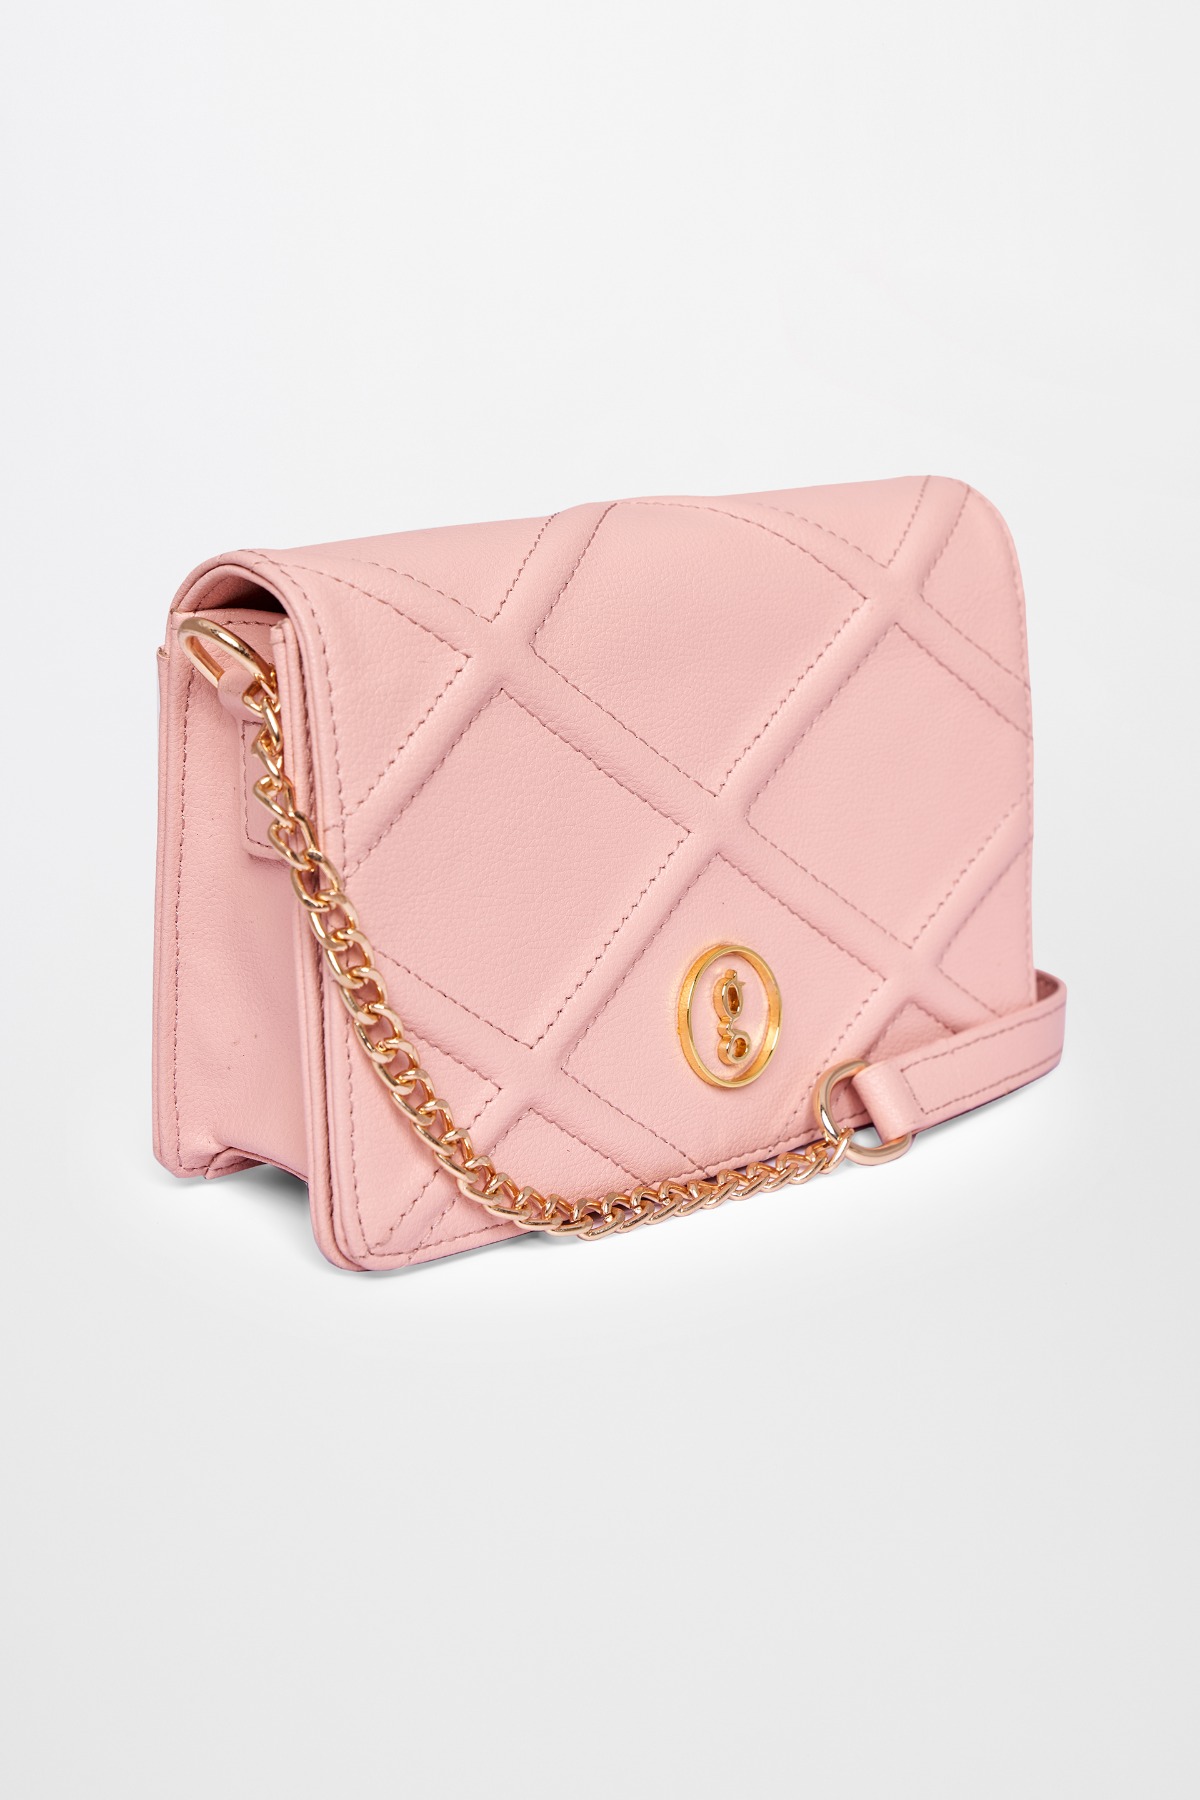 Lamby Pink Quilted and Ruffle Purse Hand Bag – Creepy Gals